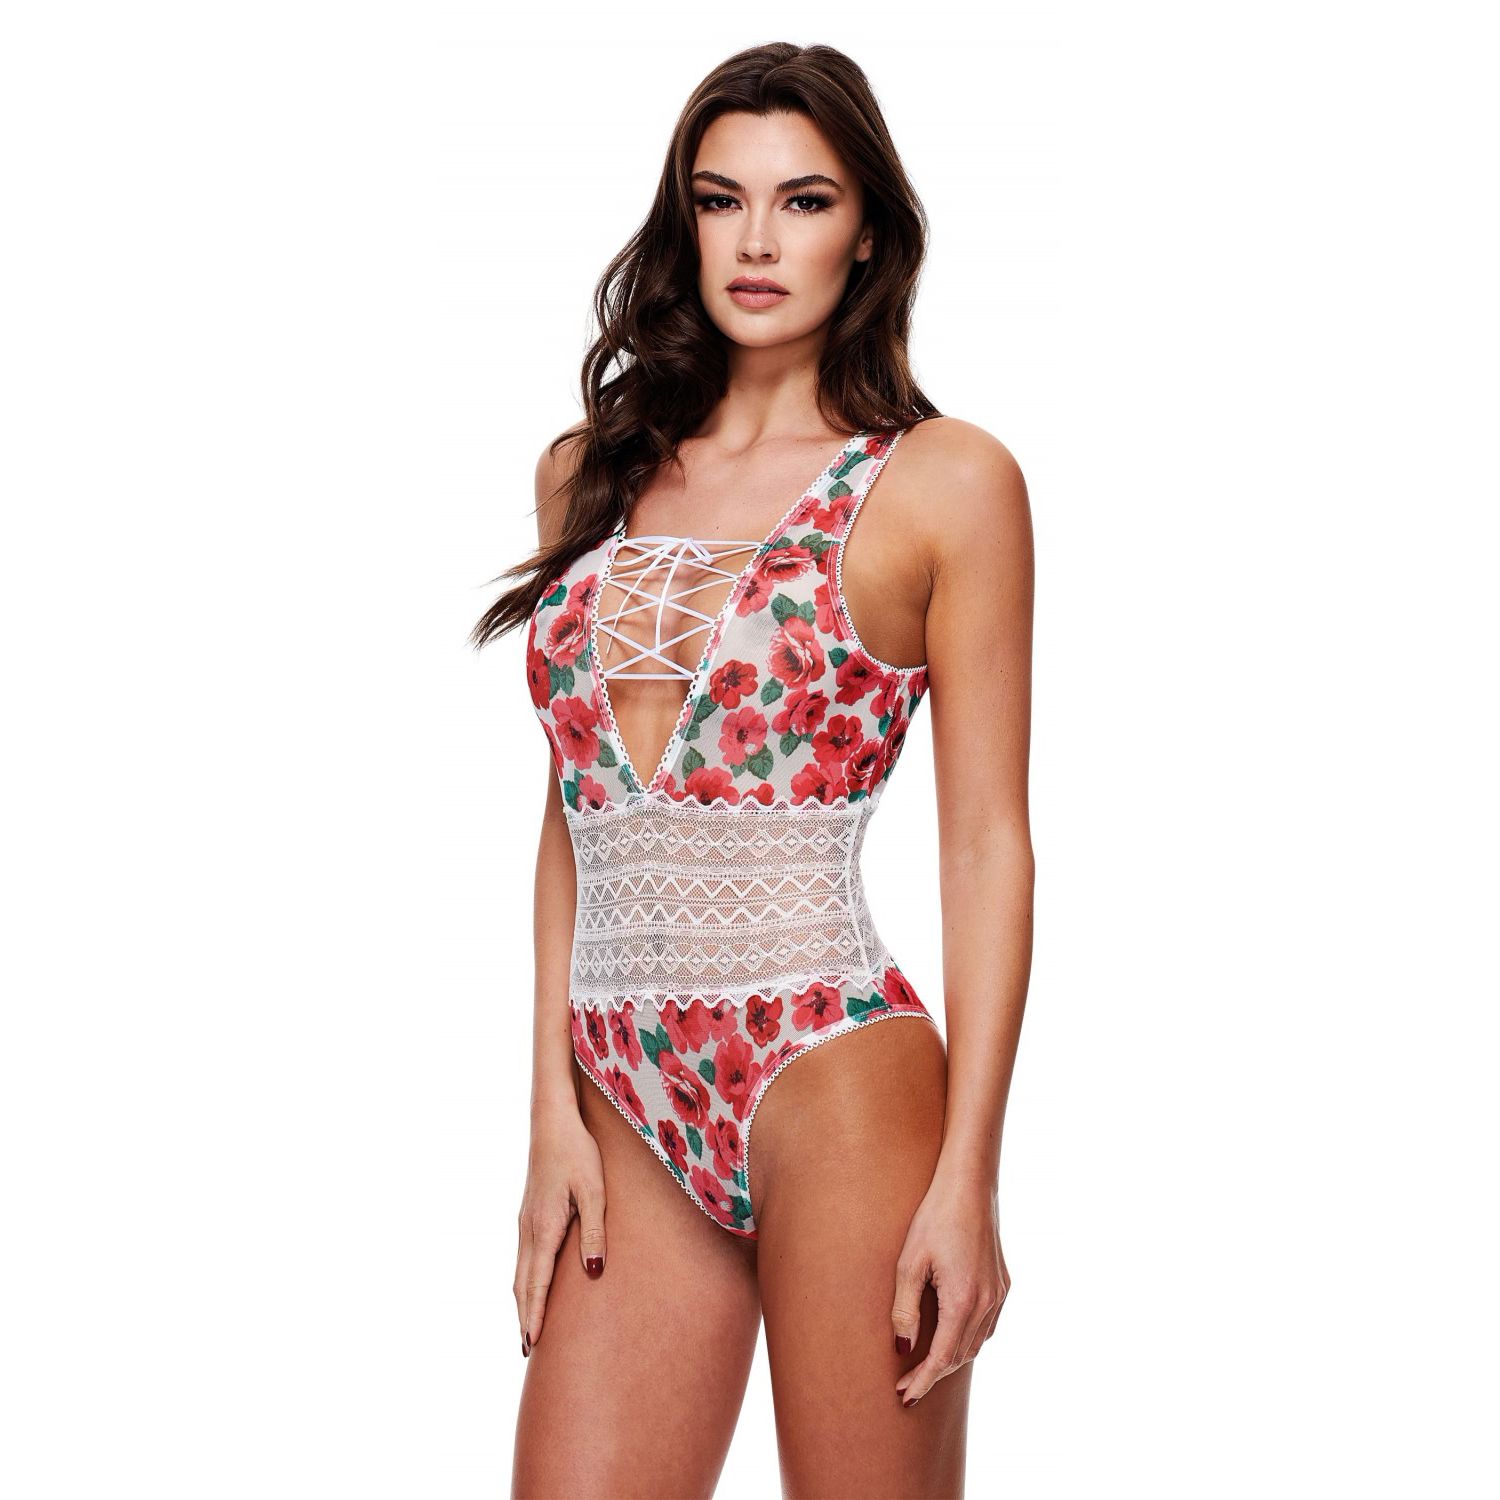 Body Baci White Floral And Lace Alb